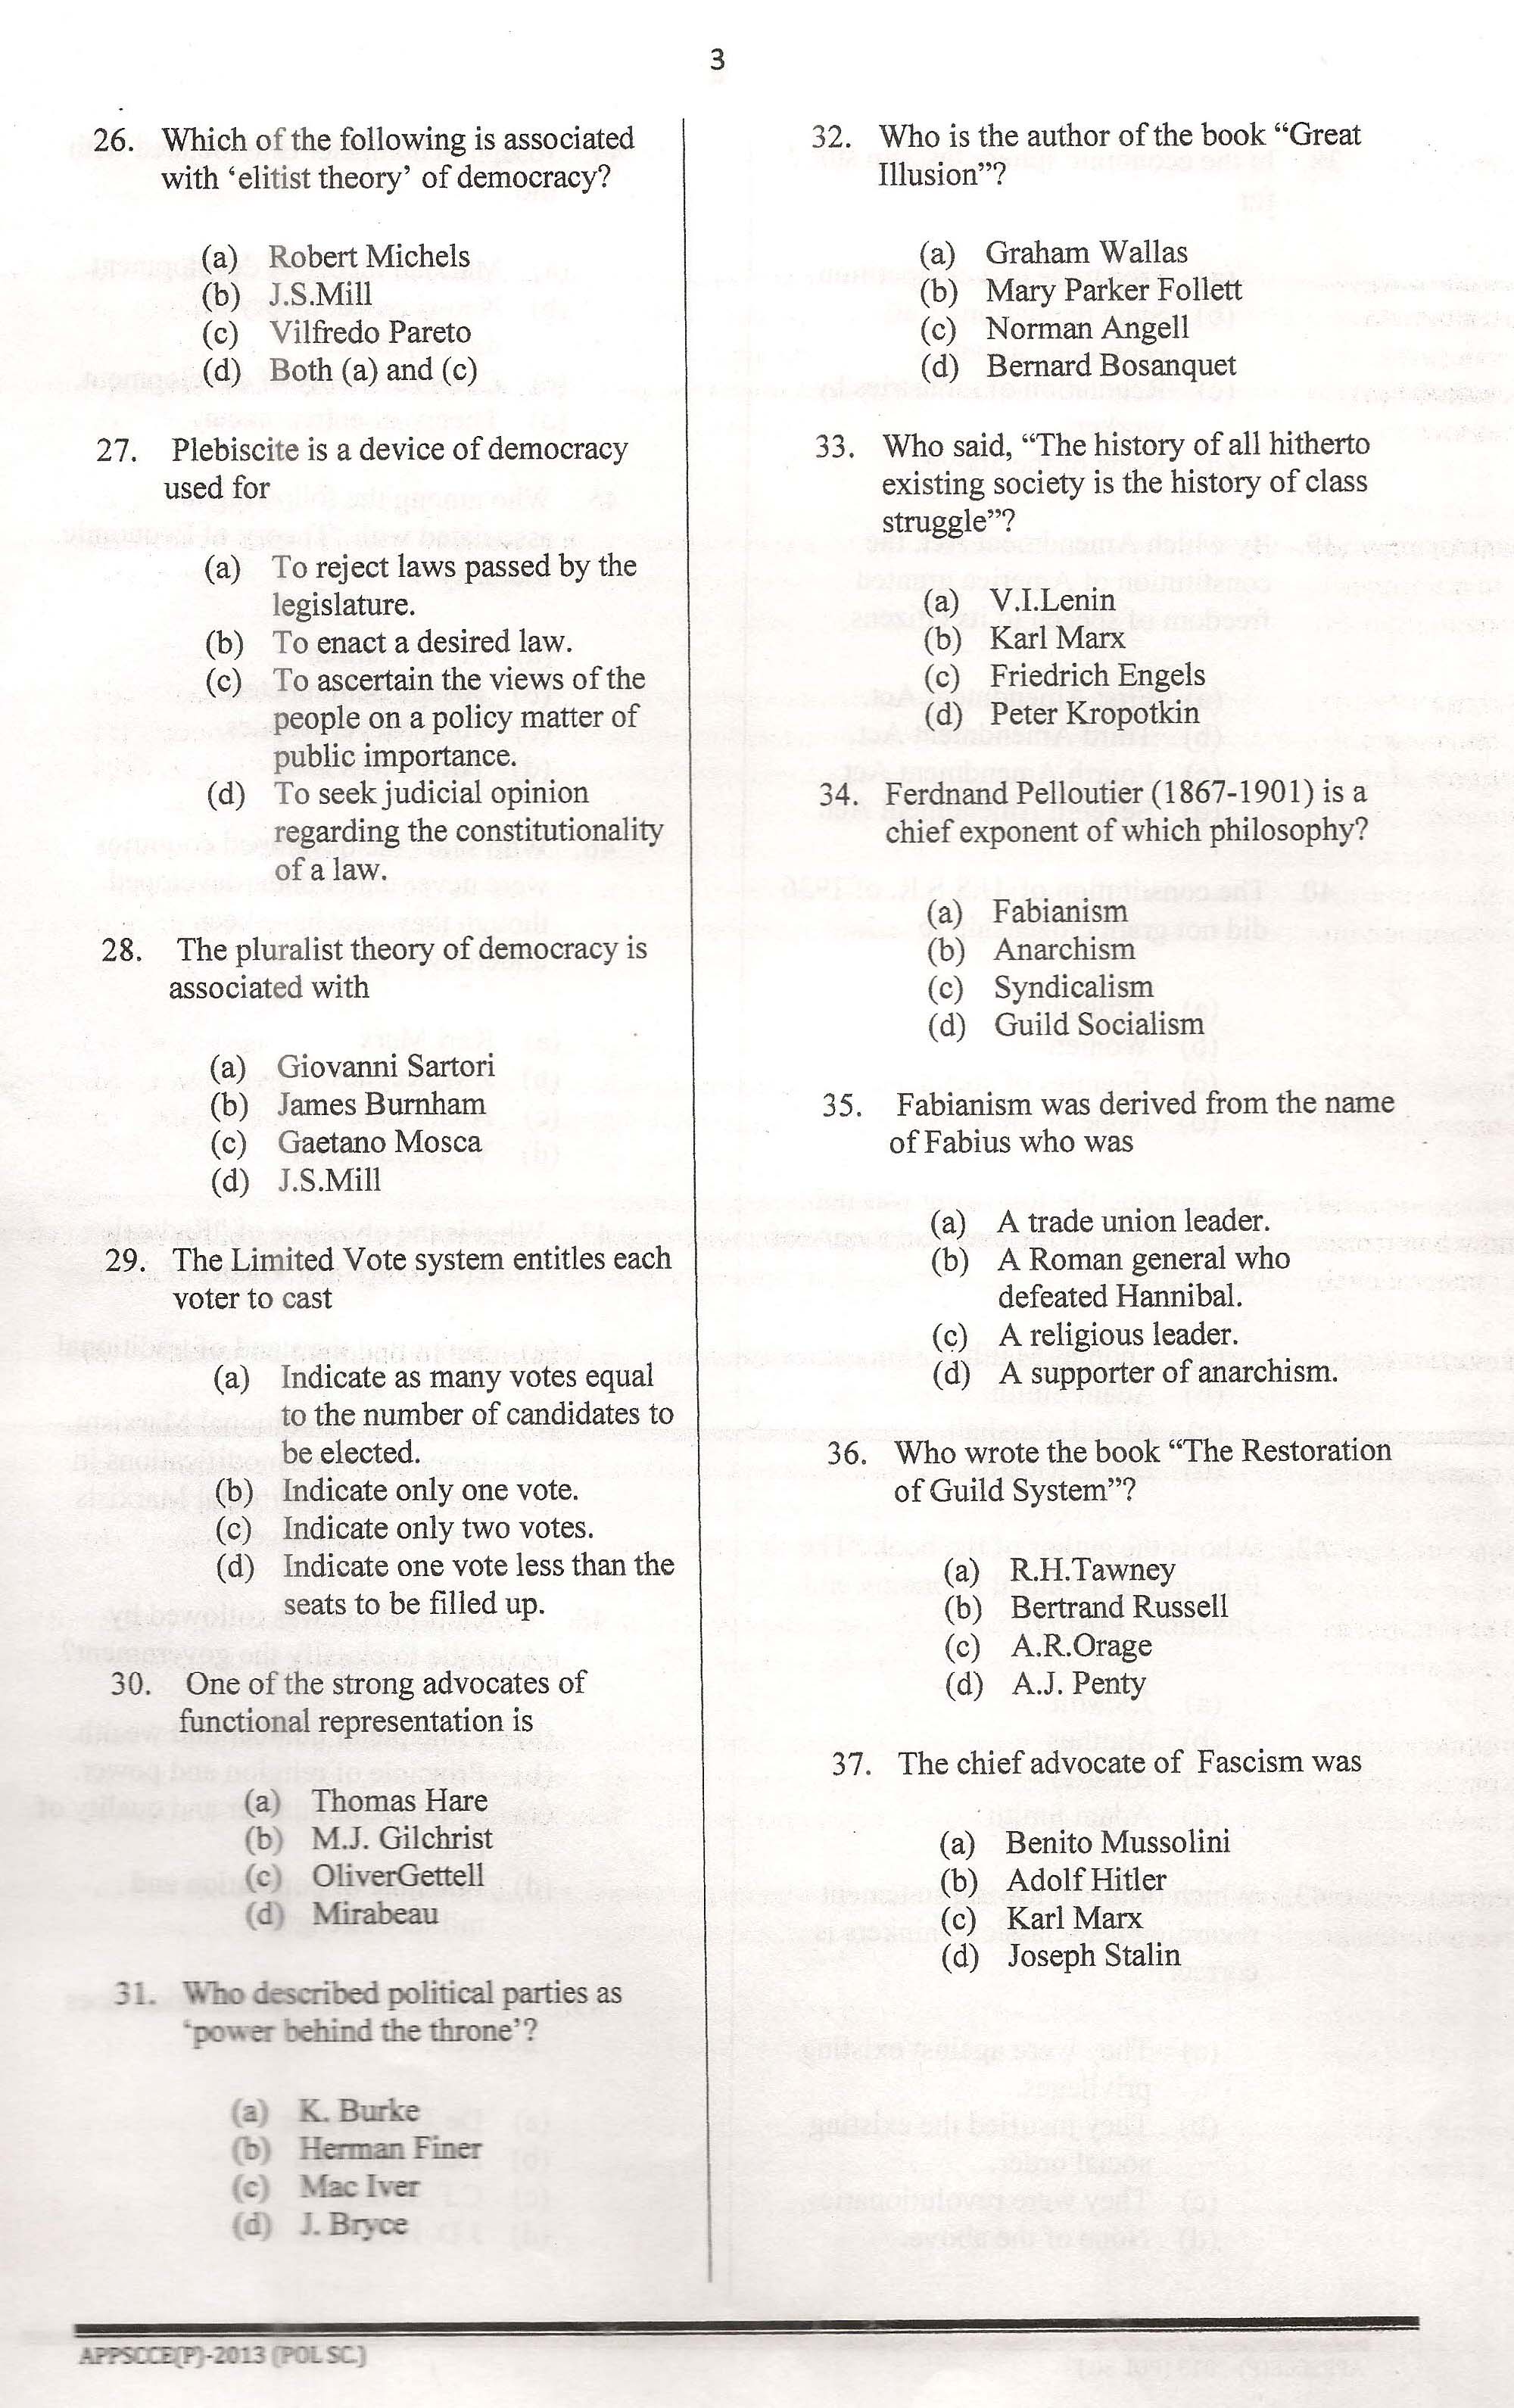 APPSC Combined Competitive Prelims Exam 2013 Political Science 4